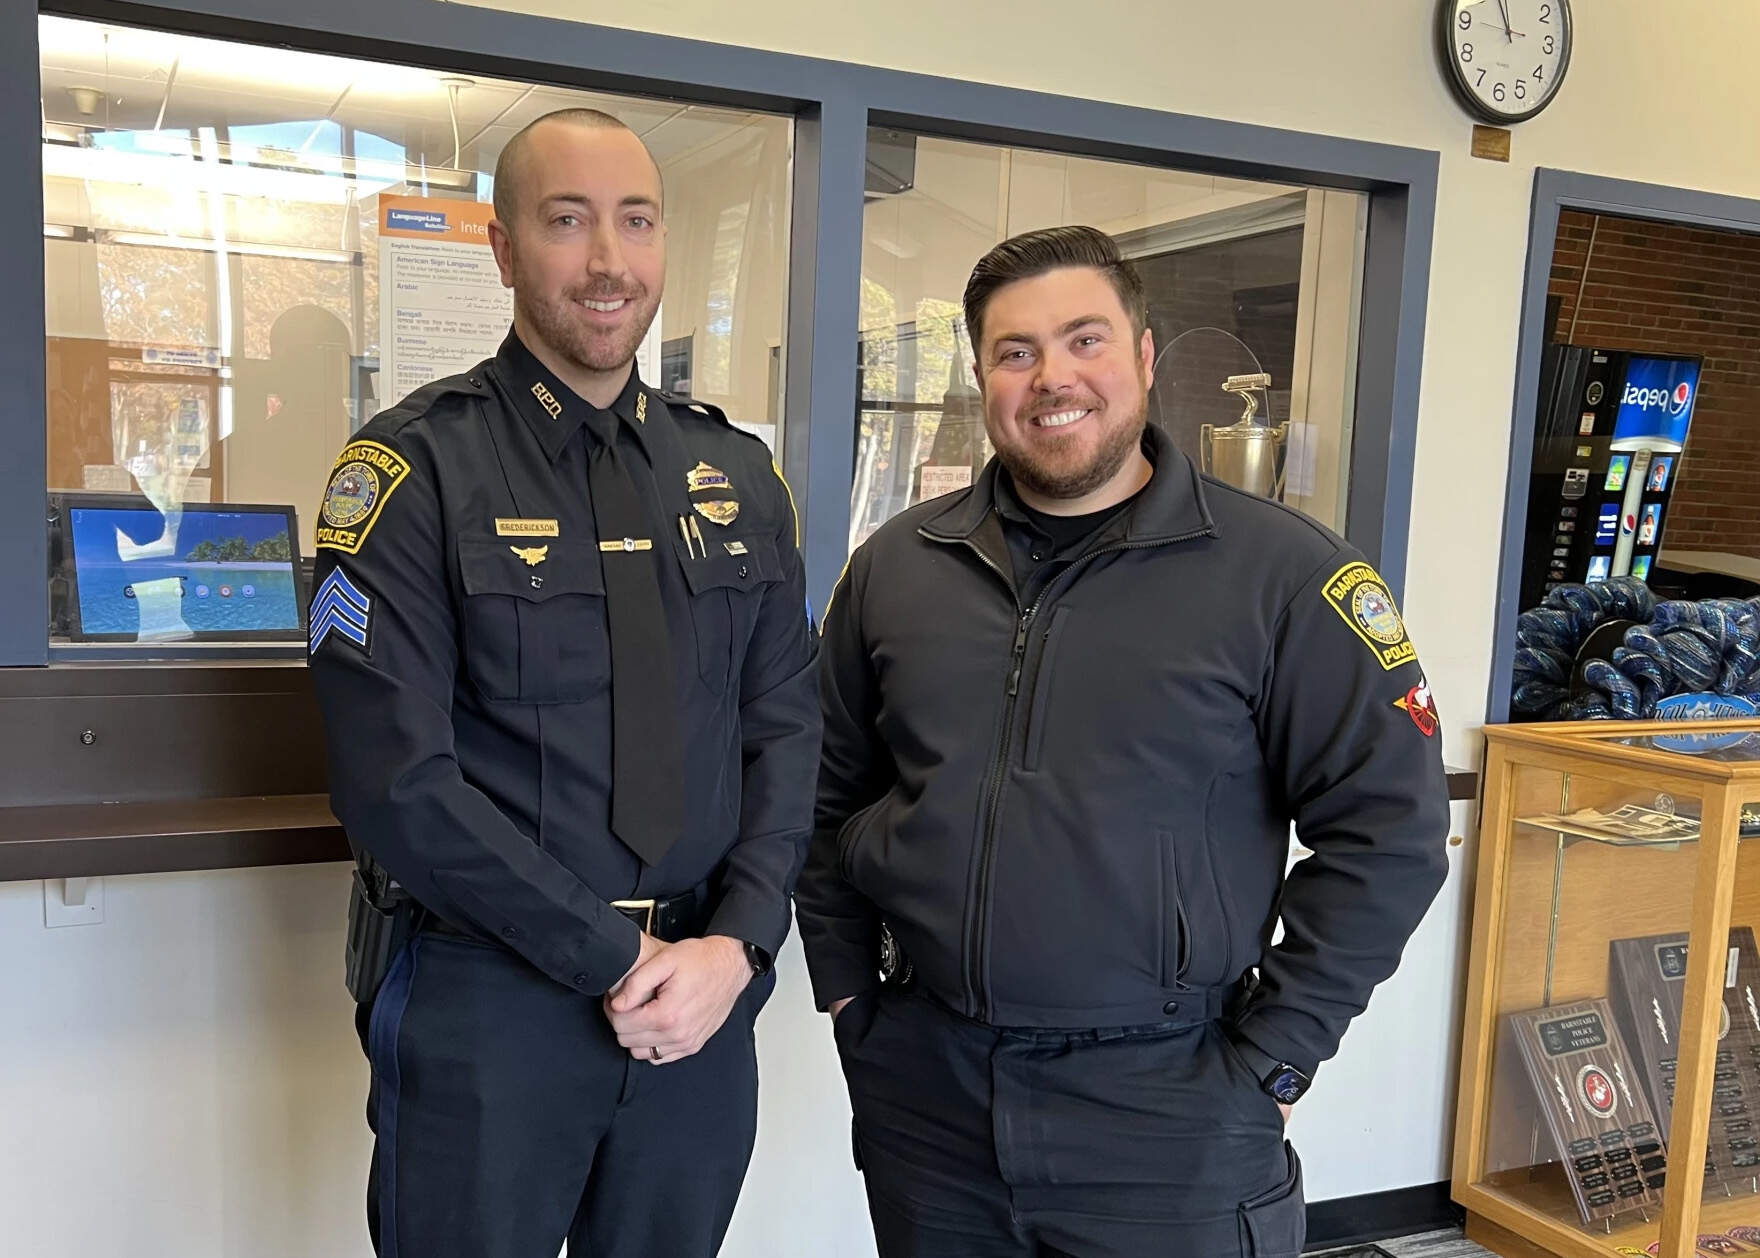 Barnstable Police Sgt. Corey Frederickson, left, and Officer Brandon Sanders talked about the high cost of housing on Cape Cod and its effect on officers and the department. (Jennette Barnes/CAI)